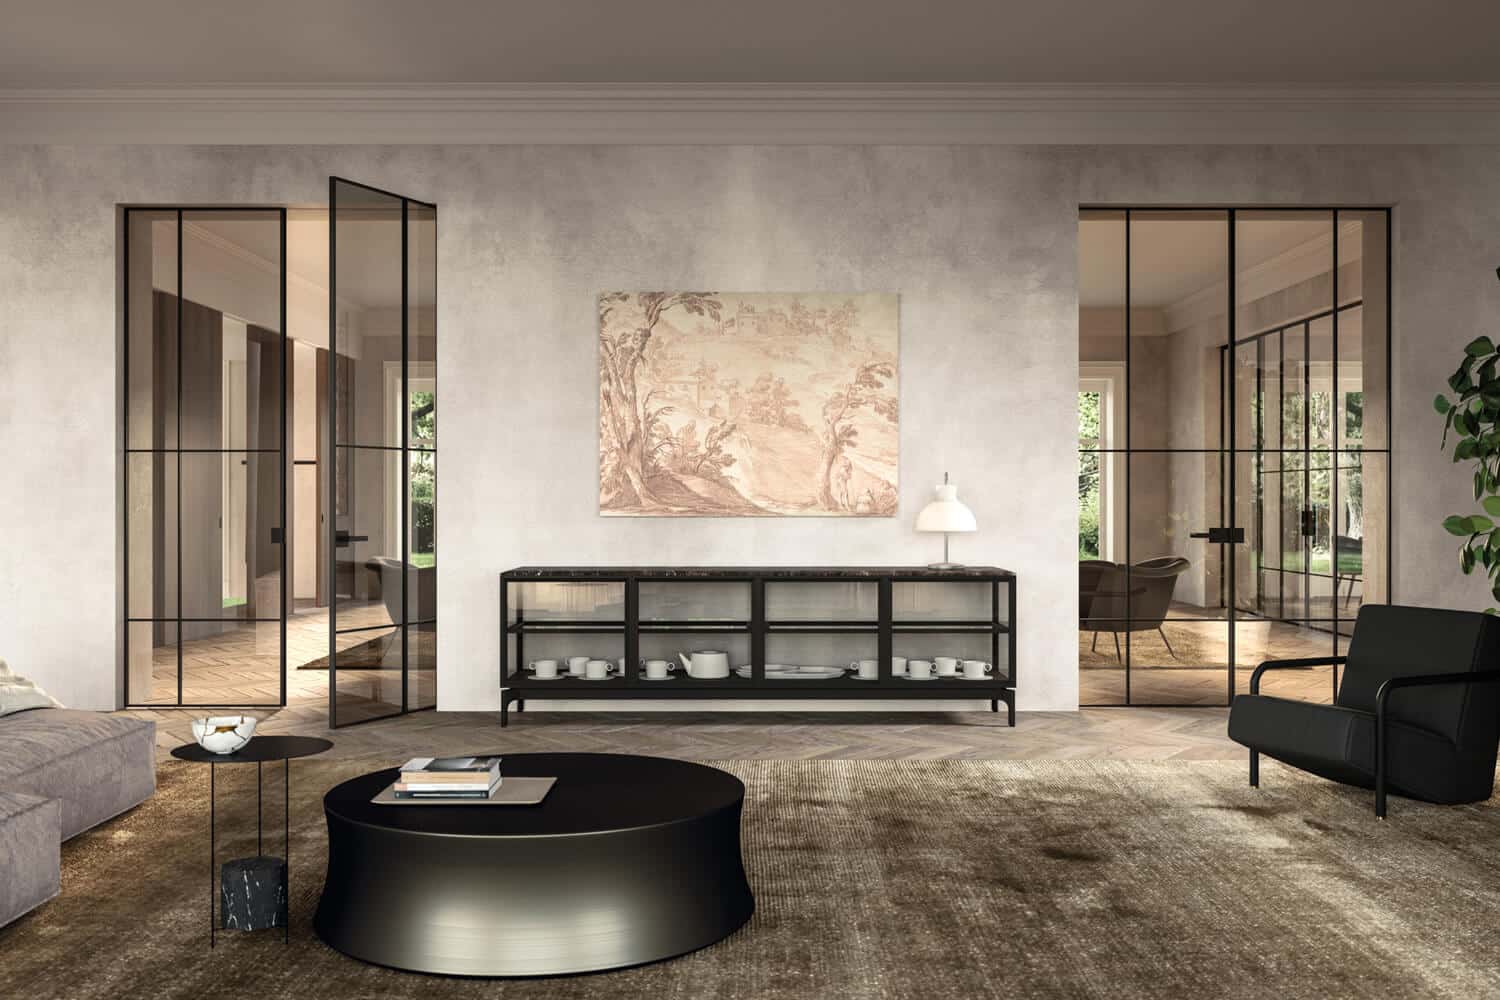 The bronze glass finish of these Manhattan doors brings a layer of depth and ambiance to the room. 